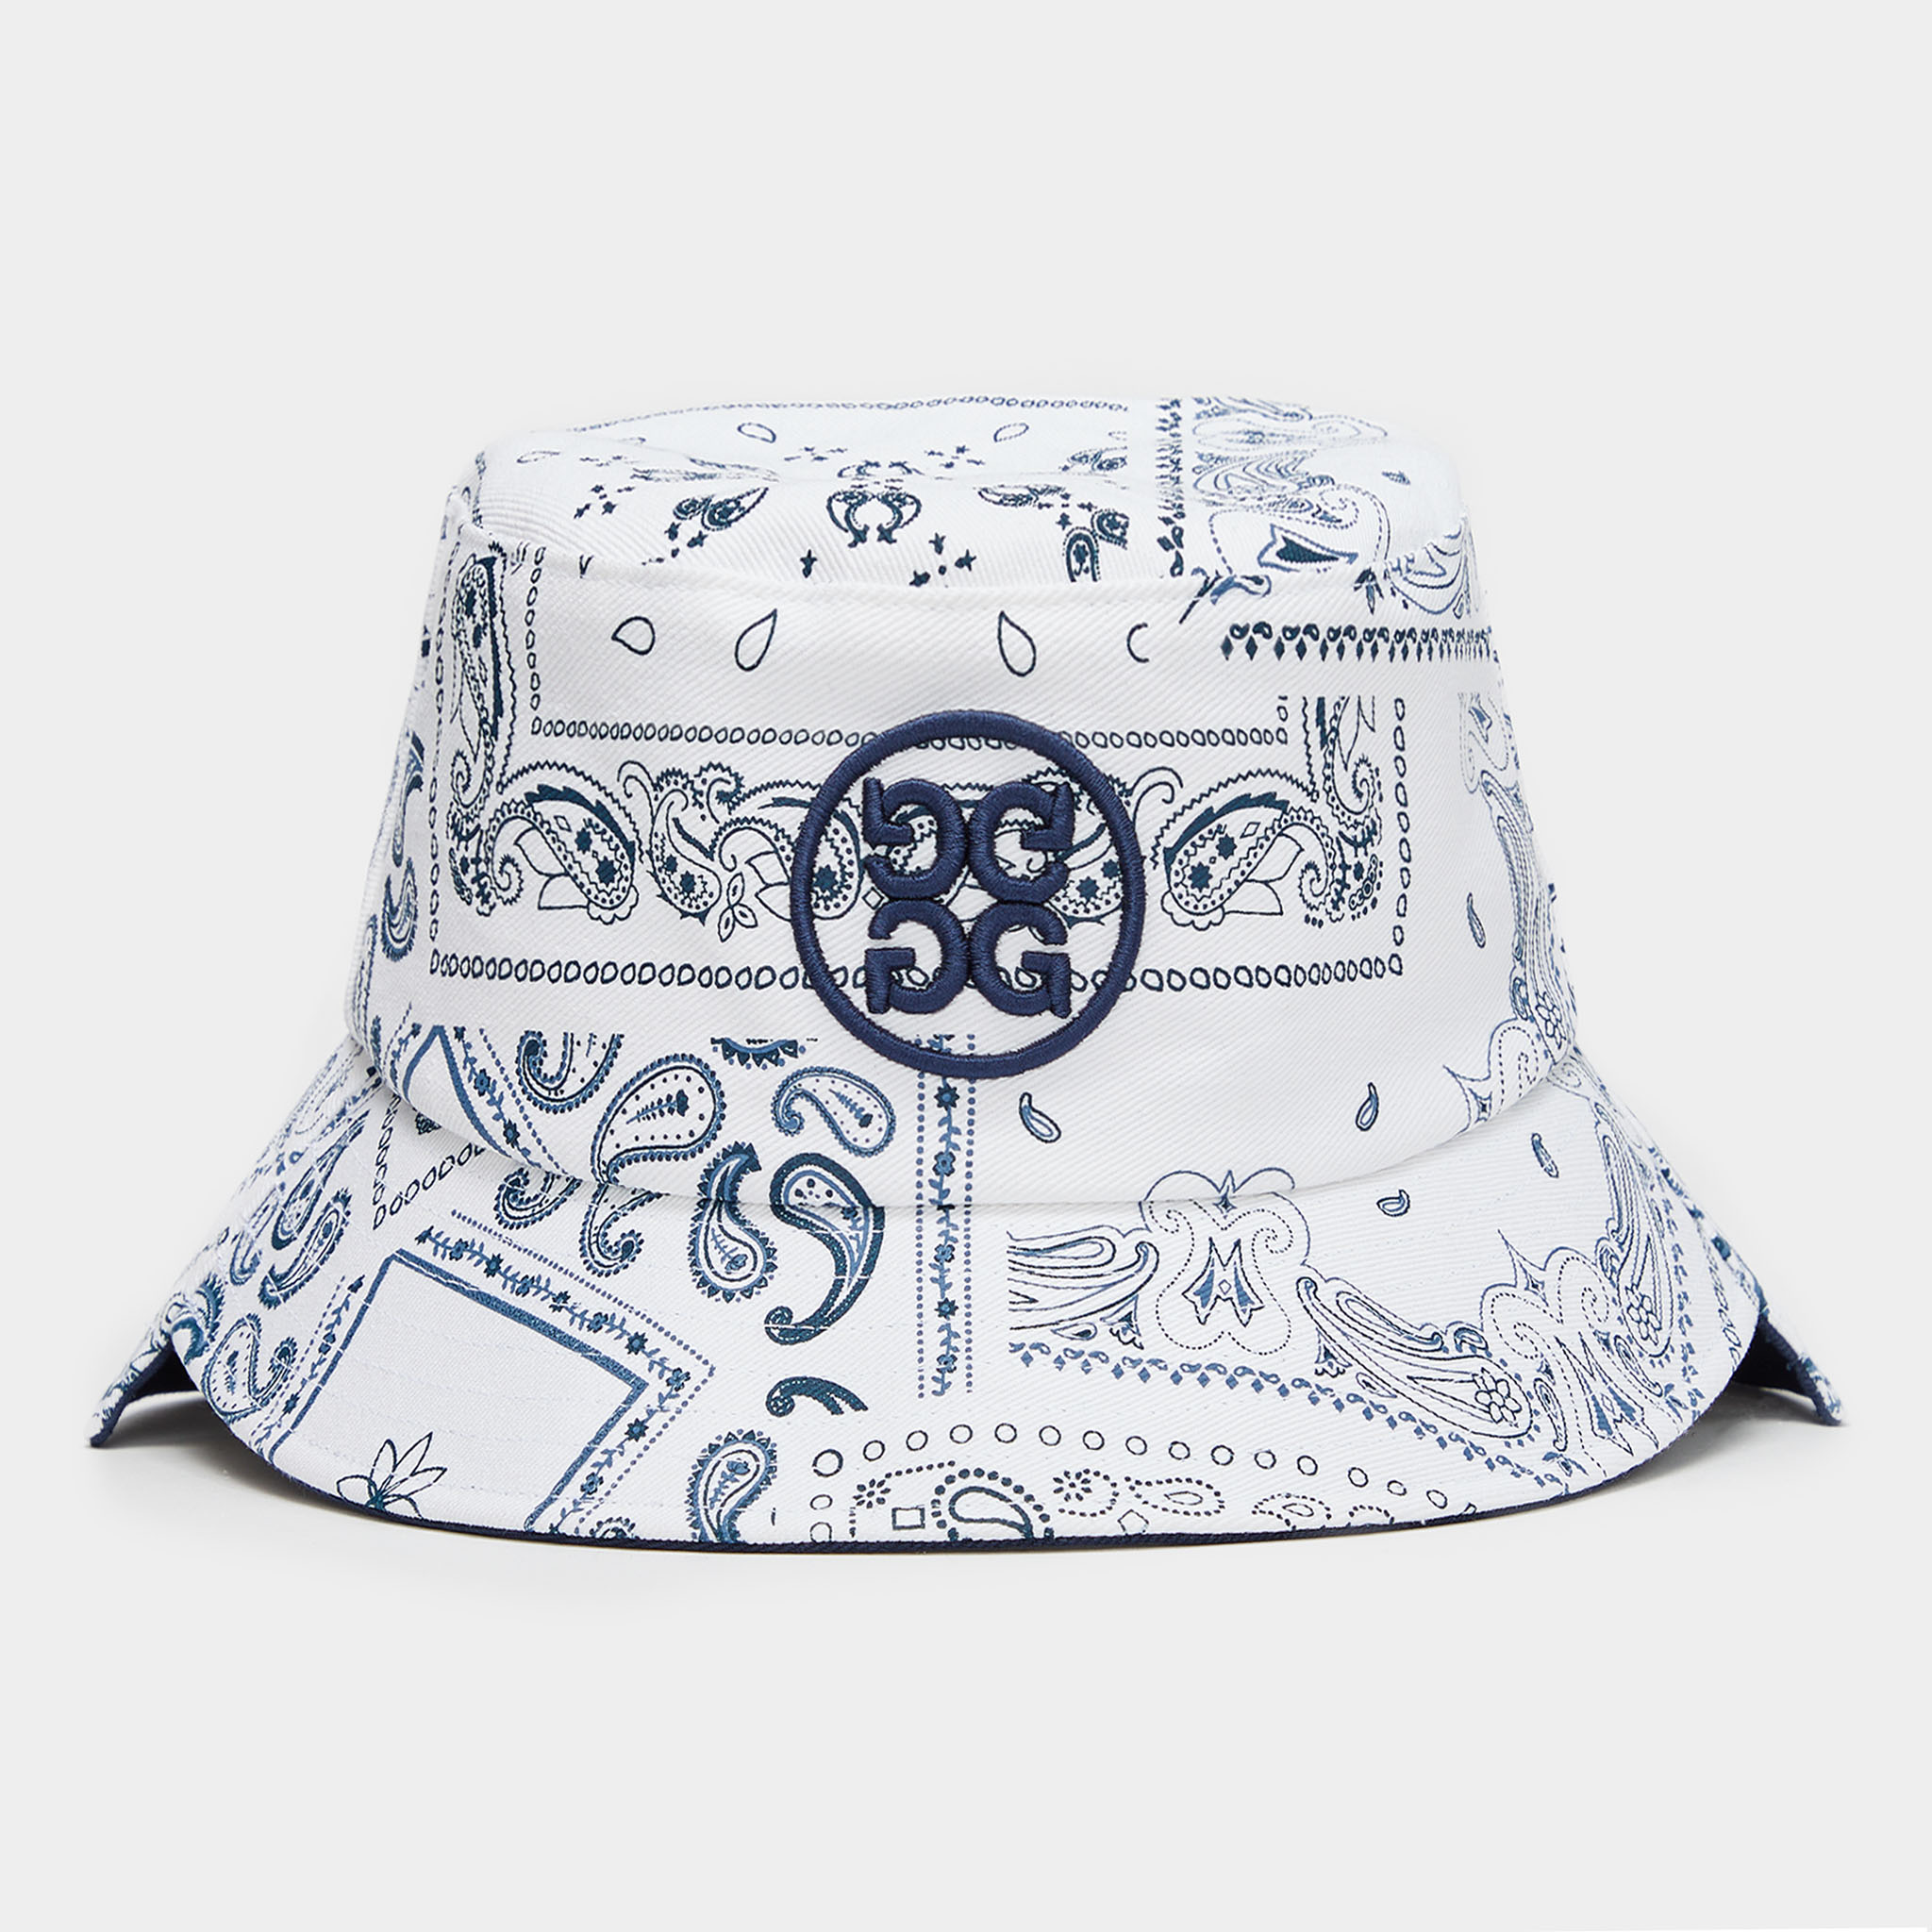 ASYMMETRICAL BORO COTTON TWILL BUCKET HAT | WOMEN'S HATS | G/FORE | G/FORE